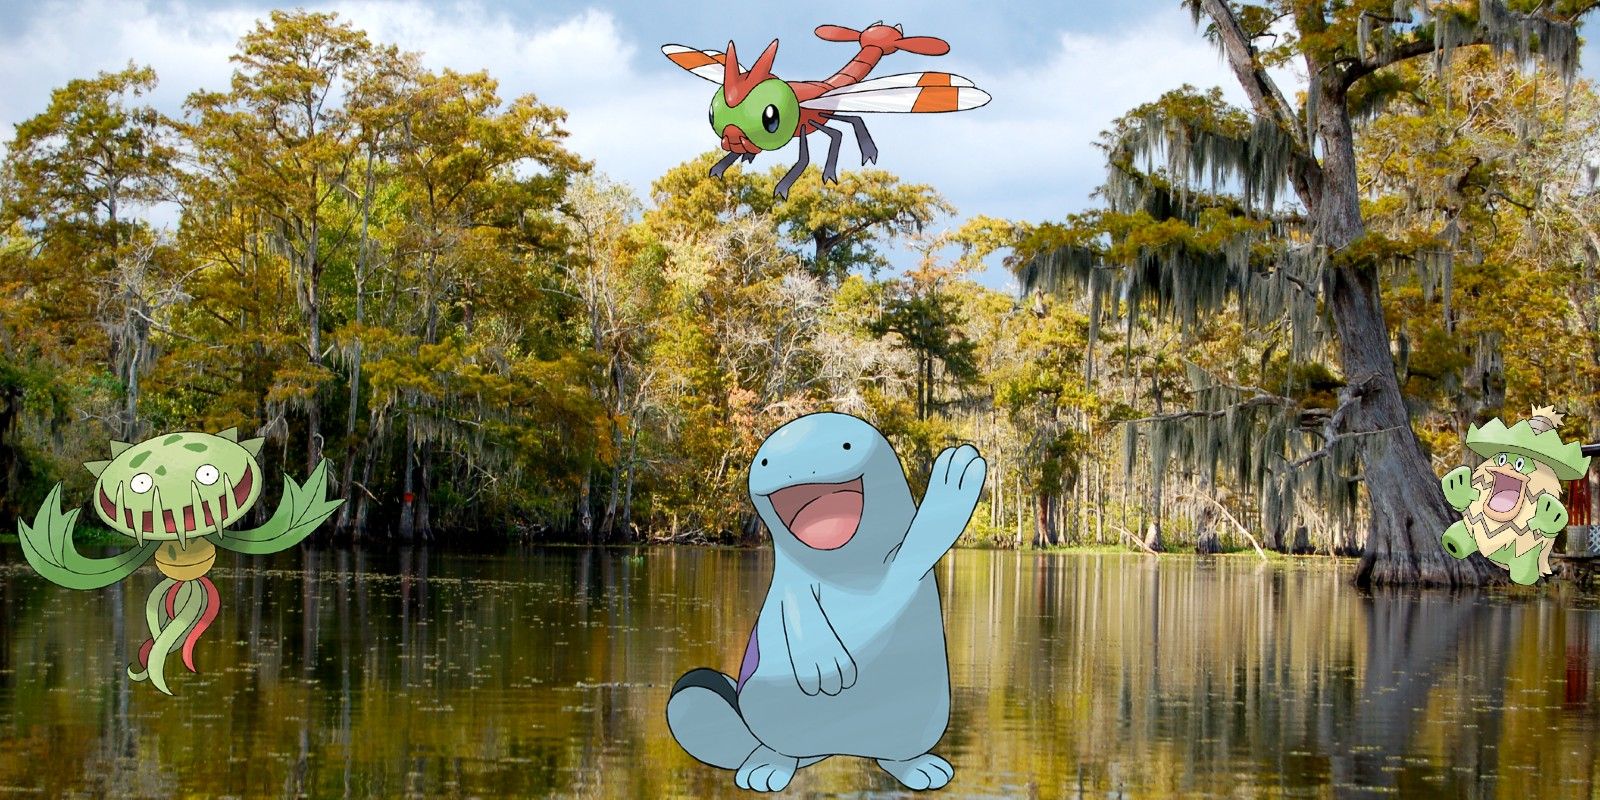 The bayou of Louisiana would be a place to catch dangerous and powerful swamp Pokémon.